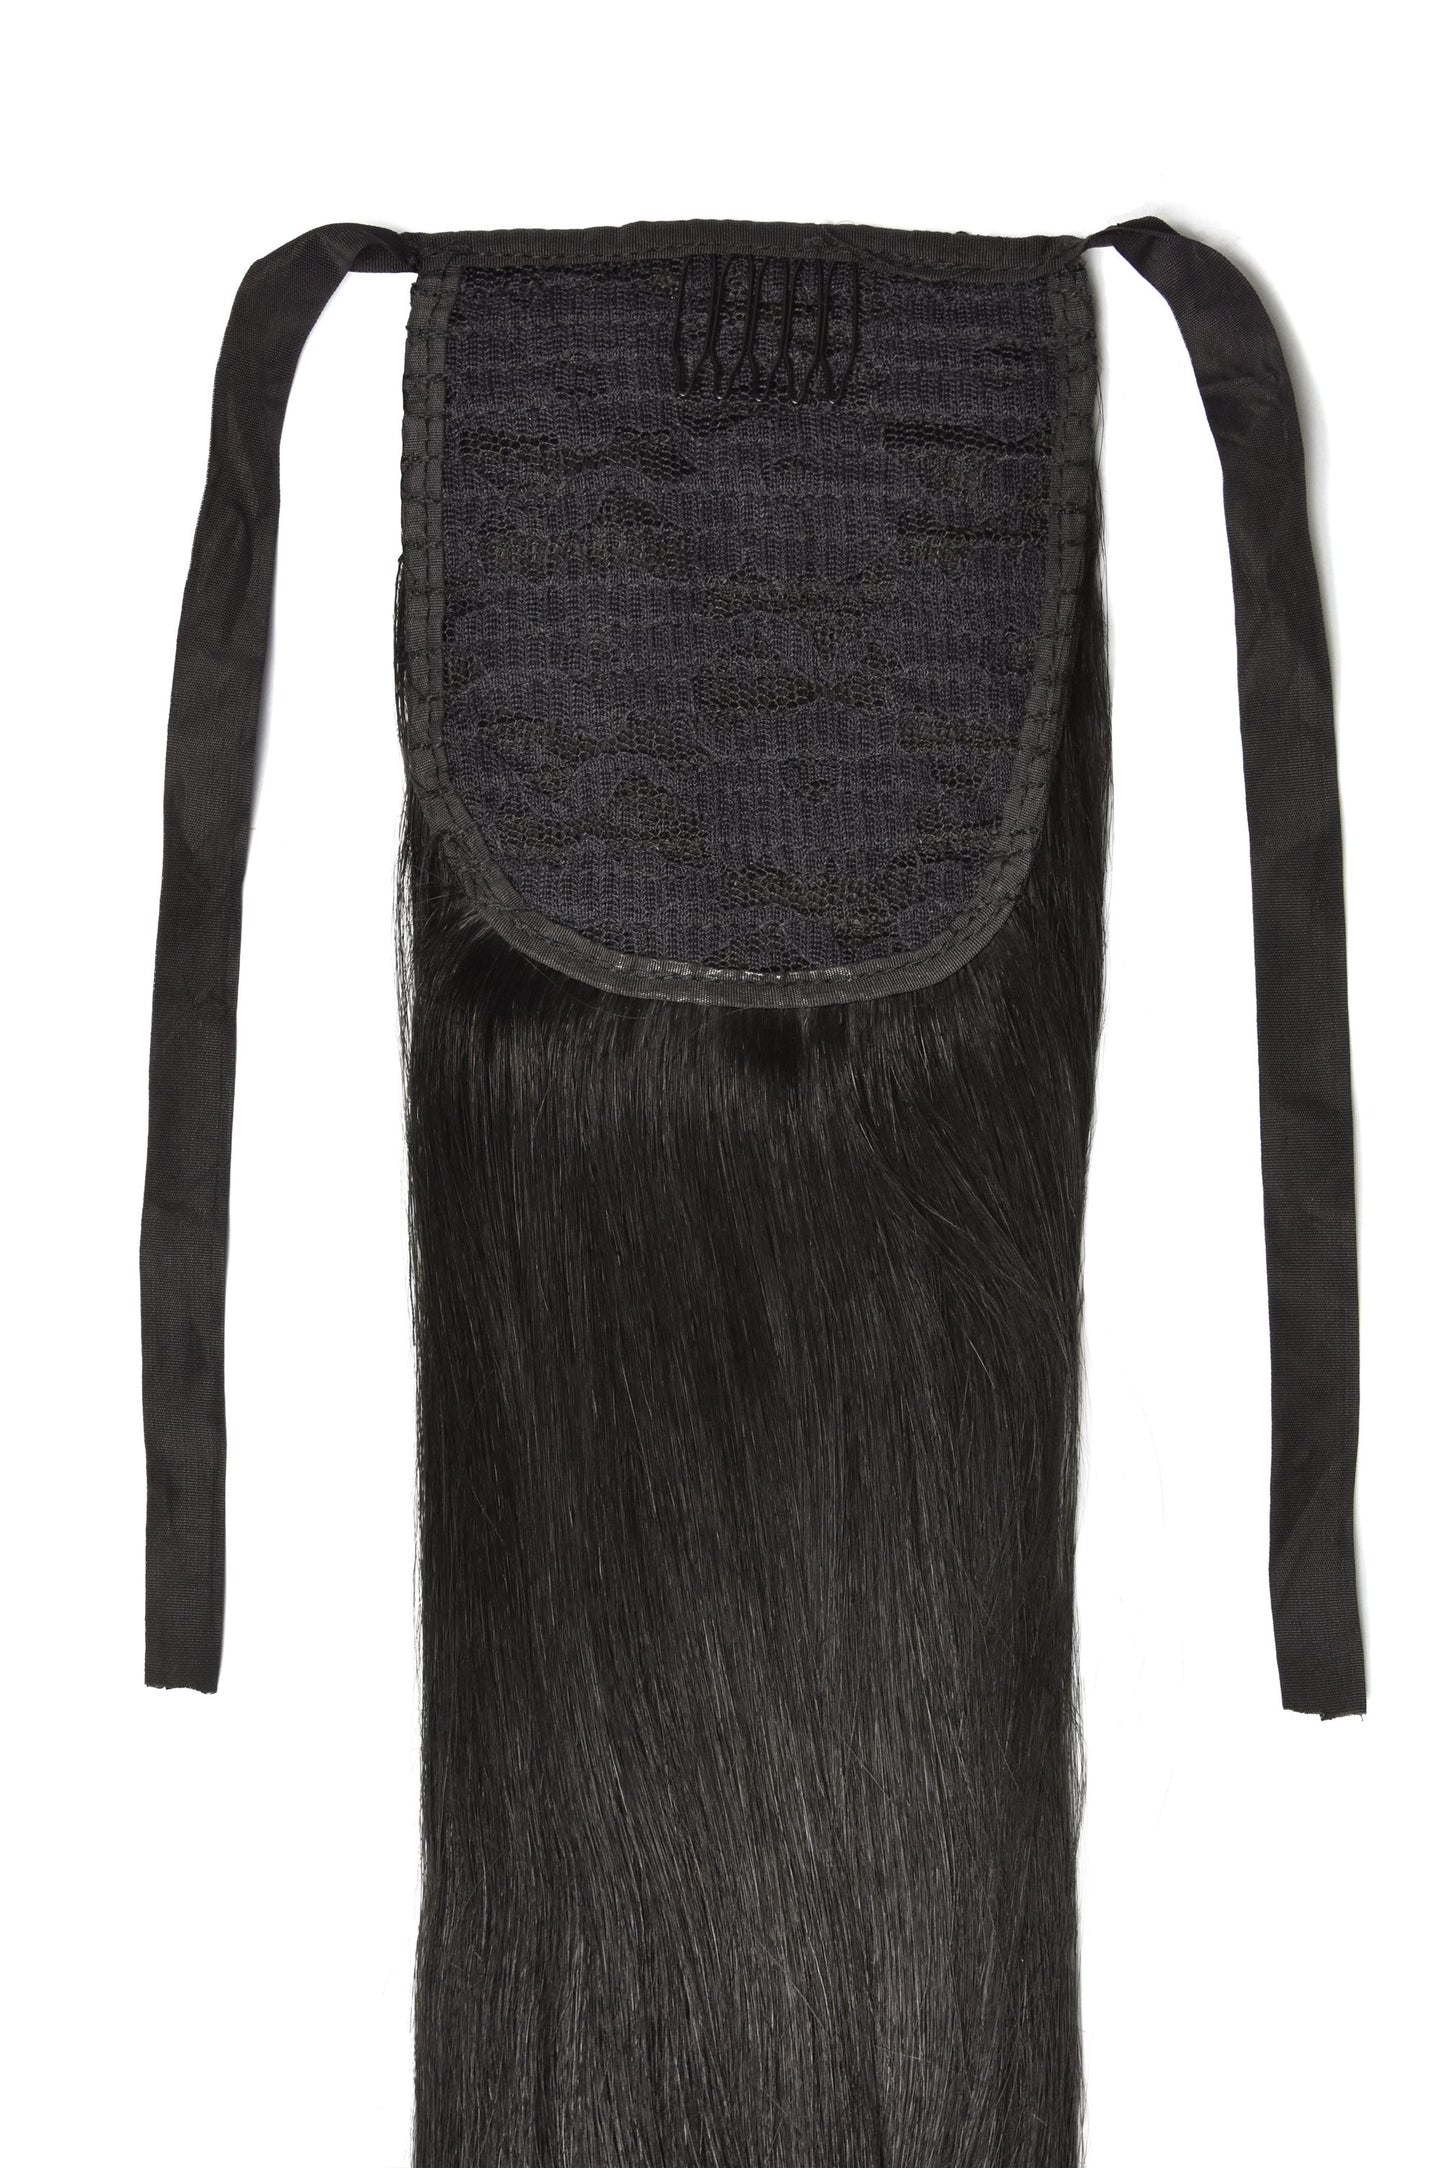 Clip in Ponytail Remy Human Hair Extensions - Natural Black (#1B)